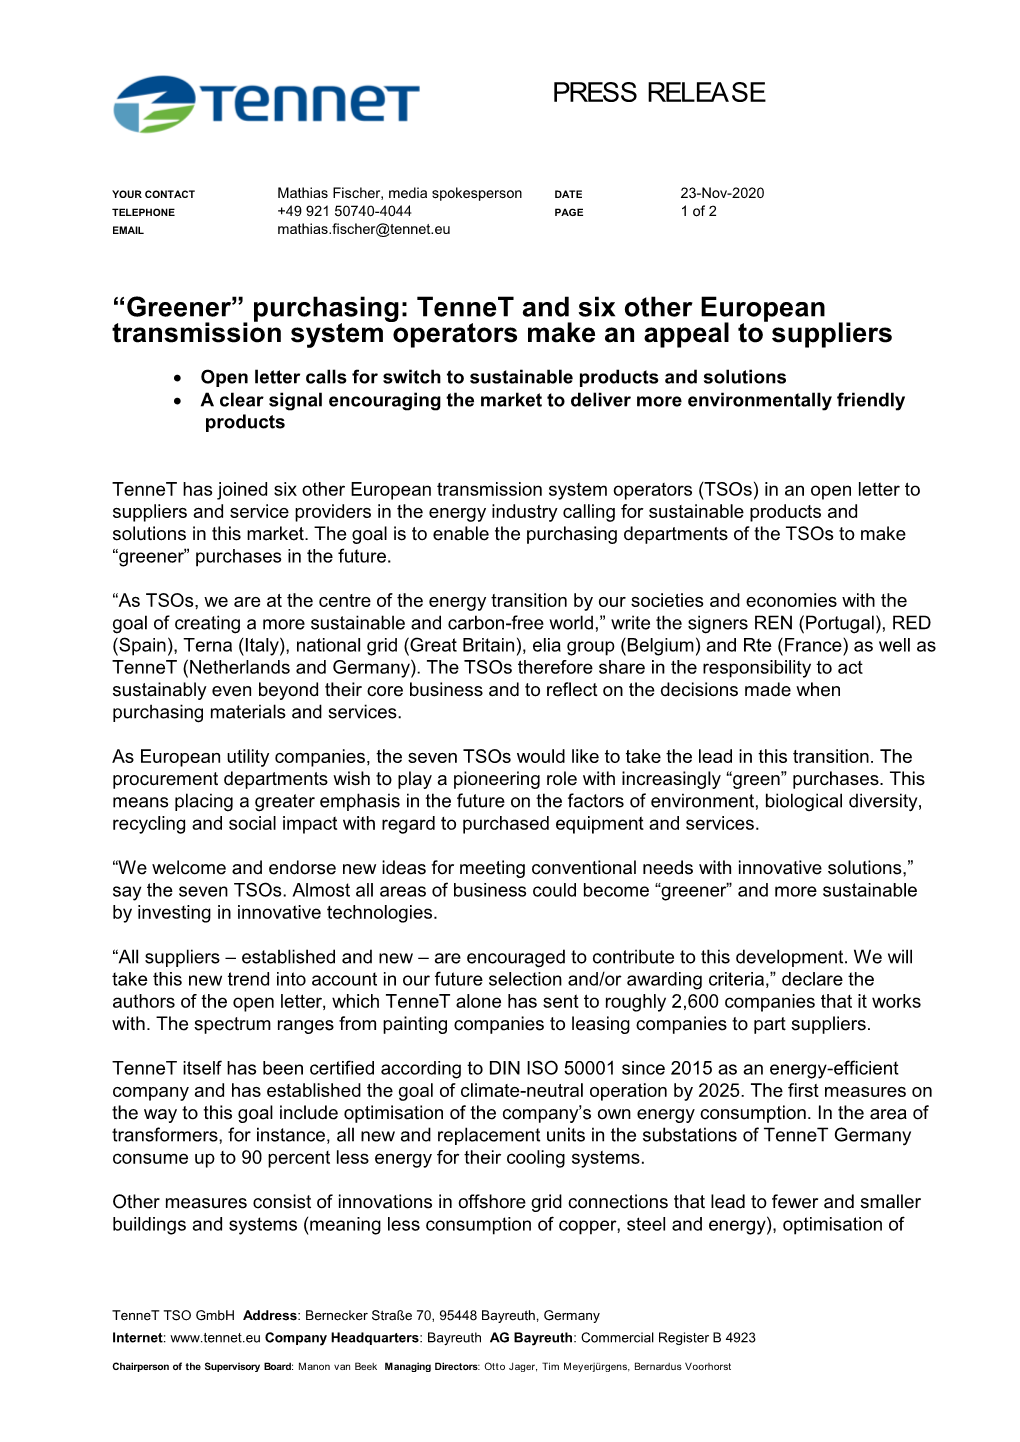 PRESS RELEASE “Greener” Purchasing: Tennet and Six Other